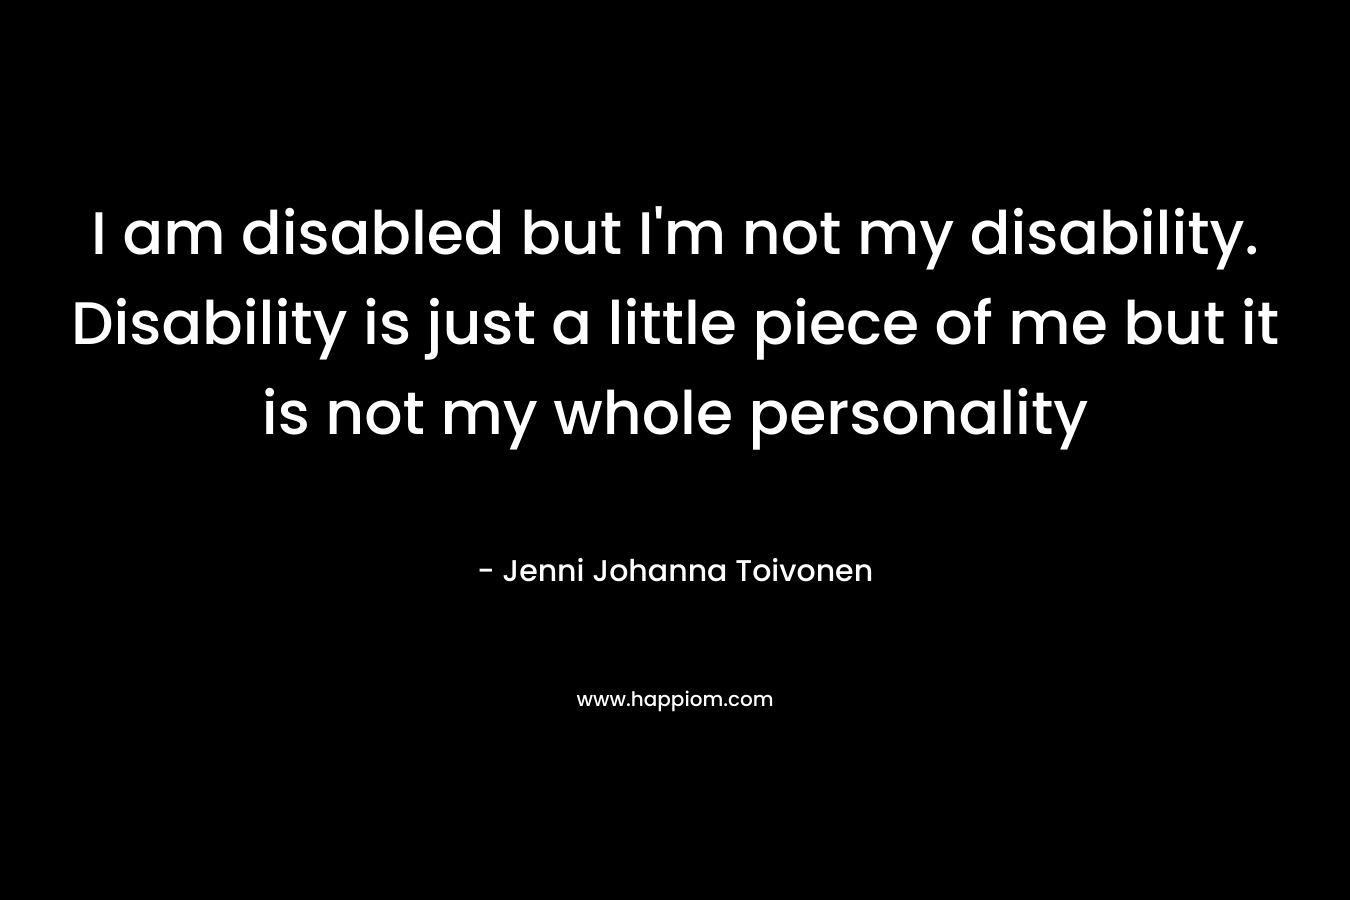 I am disabled but I’m not my disability. Disability is just a little piece of me but it is not my whole personality – Jenni Johanna Toivonen